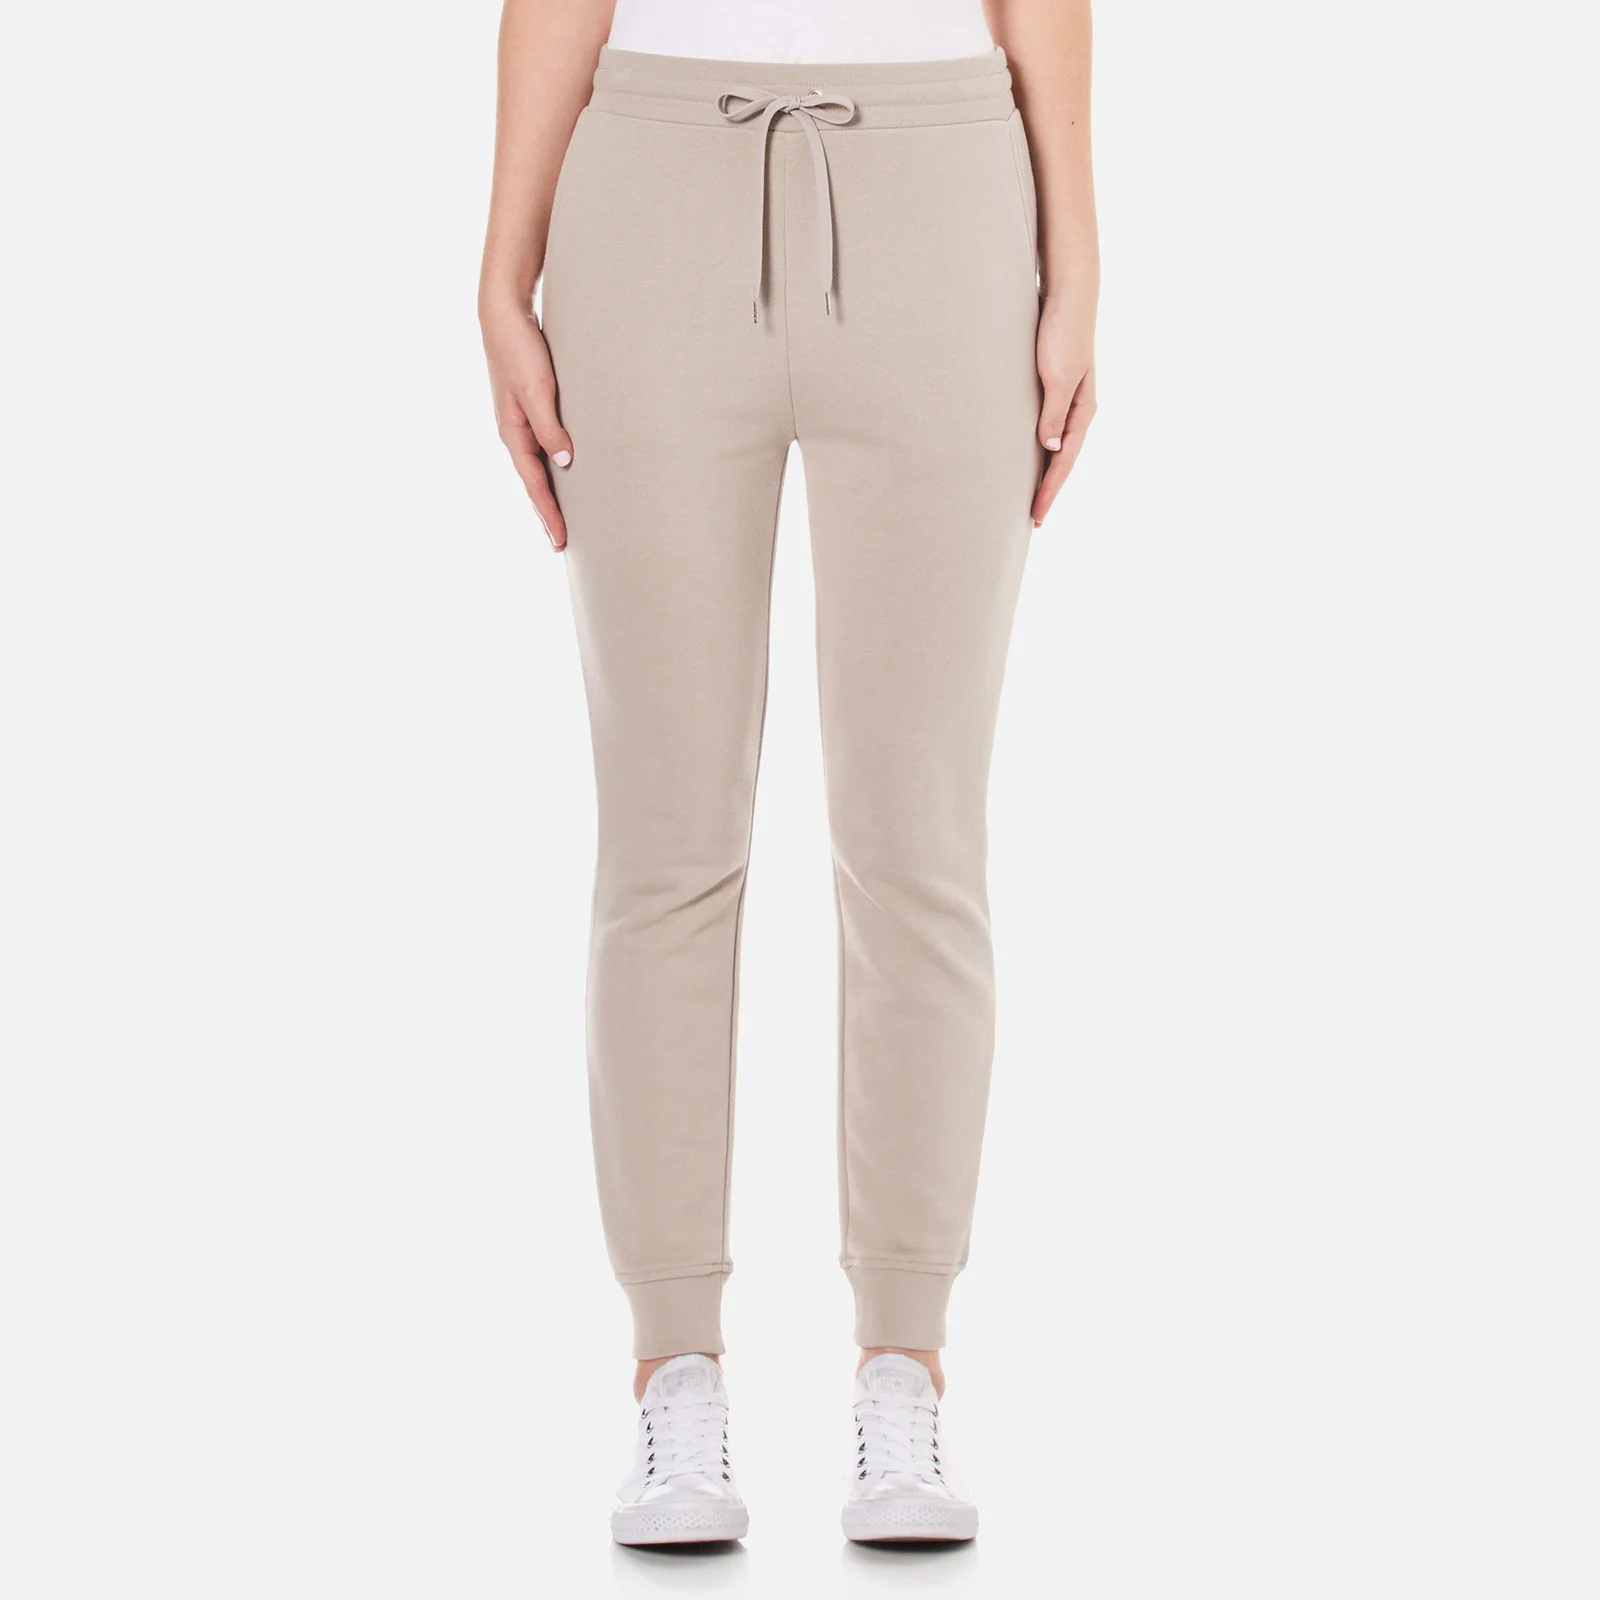 T by Alexander Wang Women's Soft French Terry Sweatpants - Beige Image 1